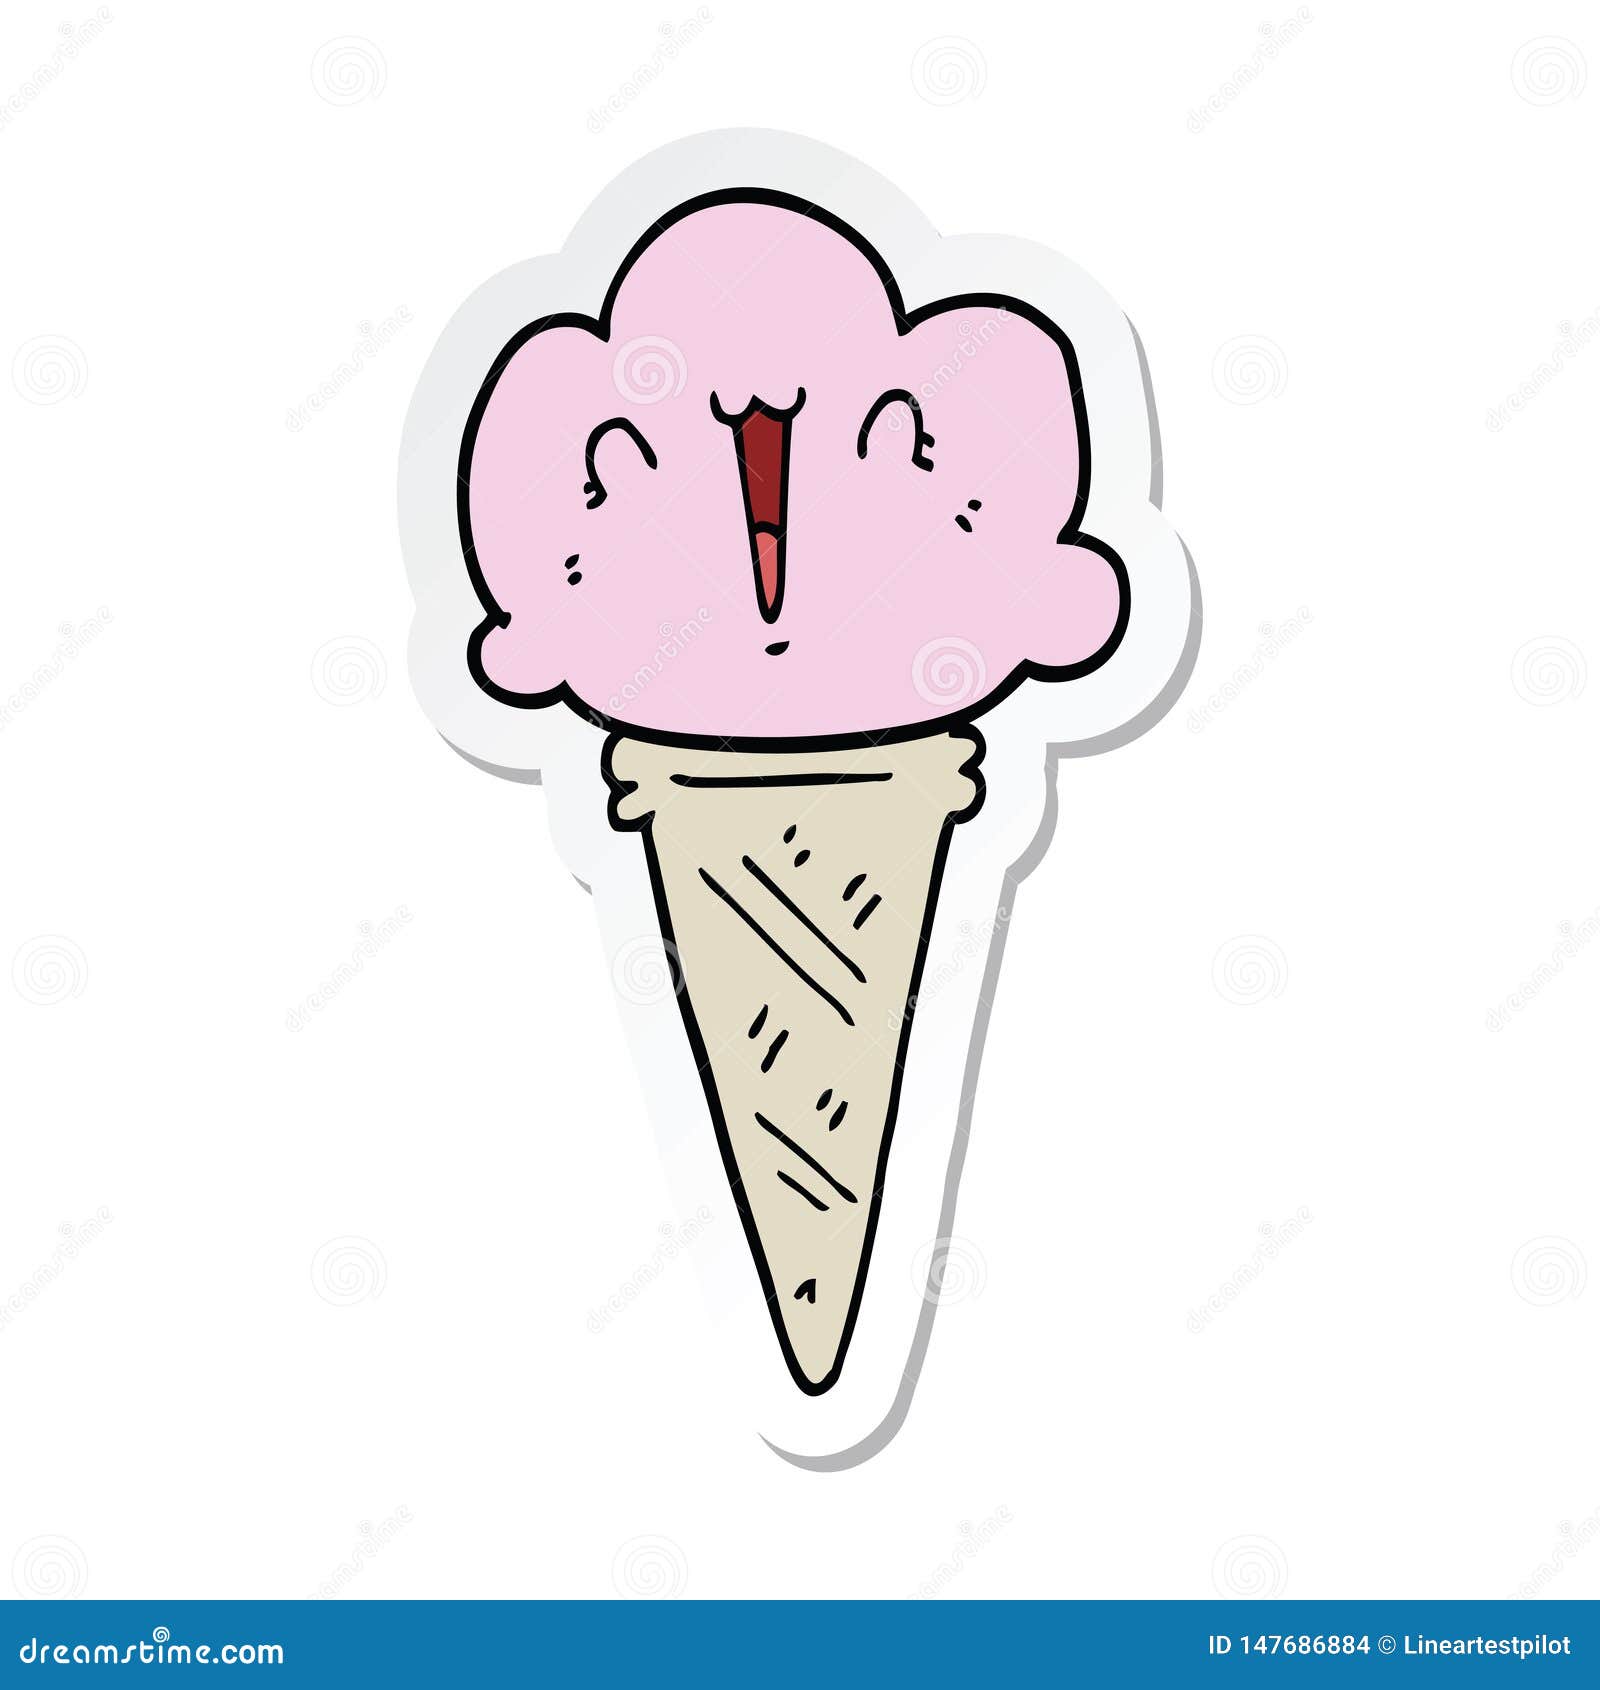 Sticker of a Cartoon Ice Cream with Face Stock Vector - Illustration of  freehand, stick: 147686884